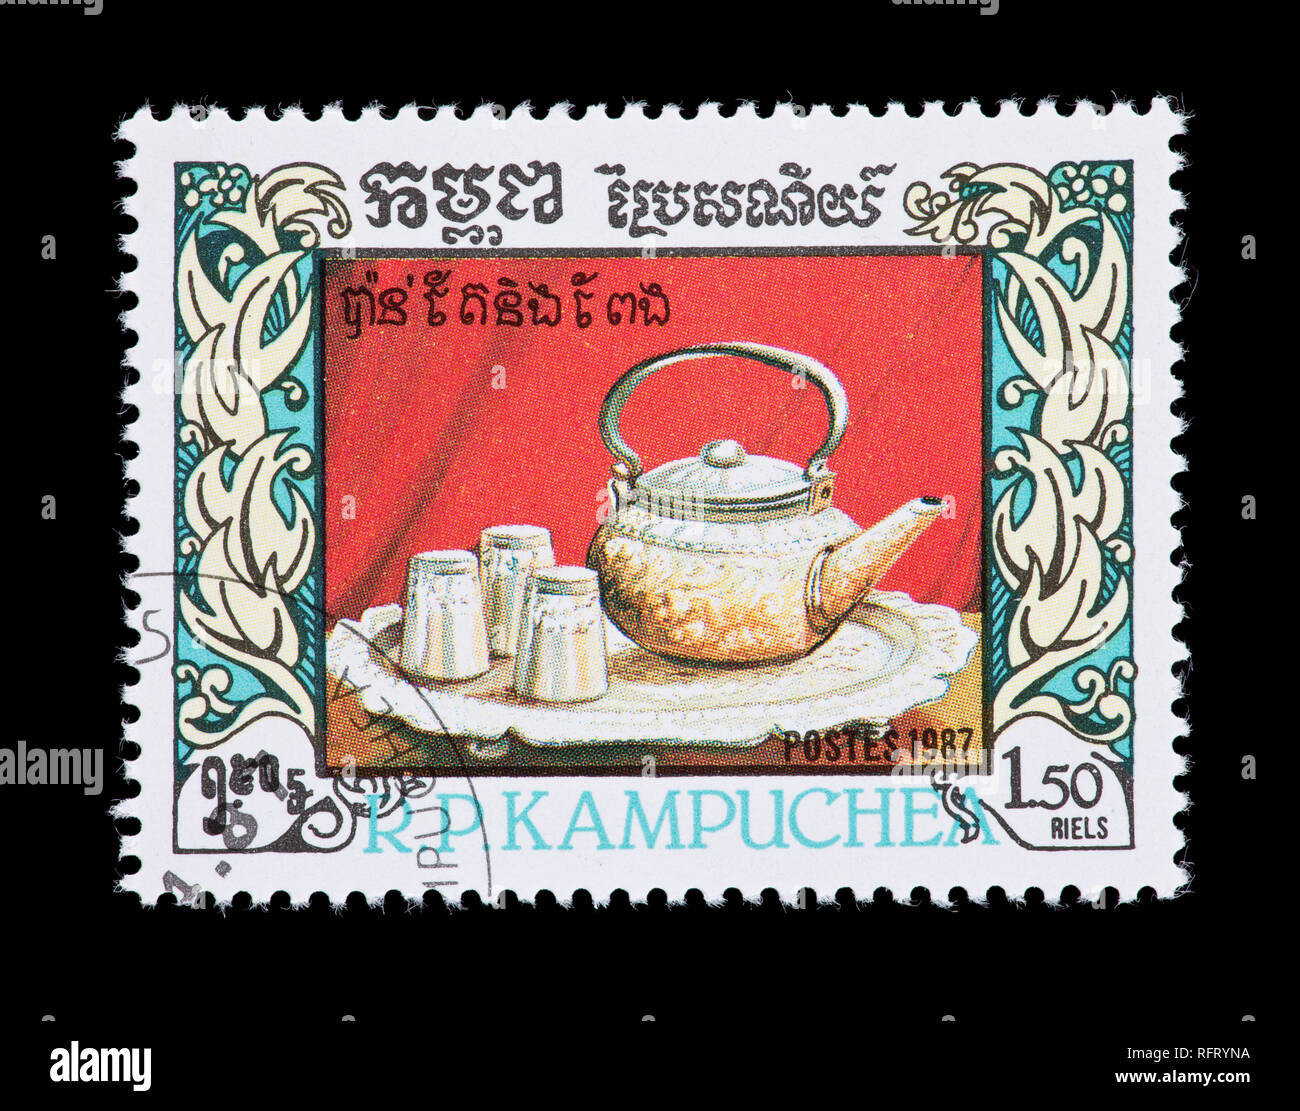 Postage stamp from Cambodia (Kampuchea) depicting a tea set Stock Photo